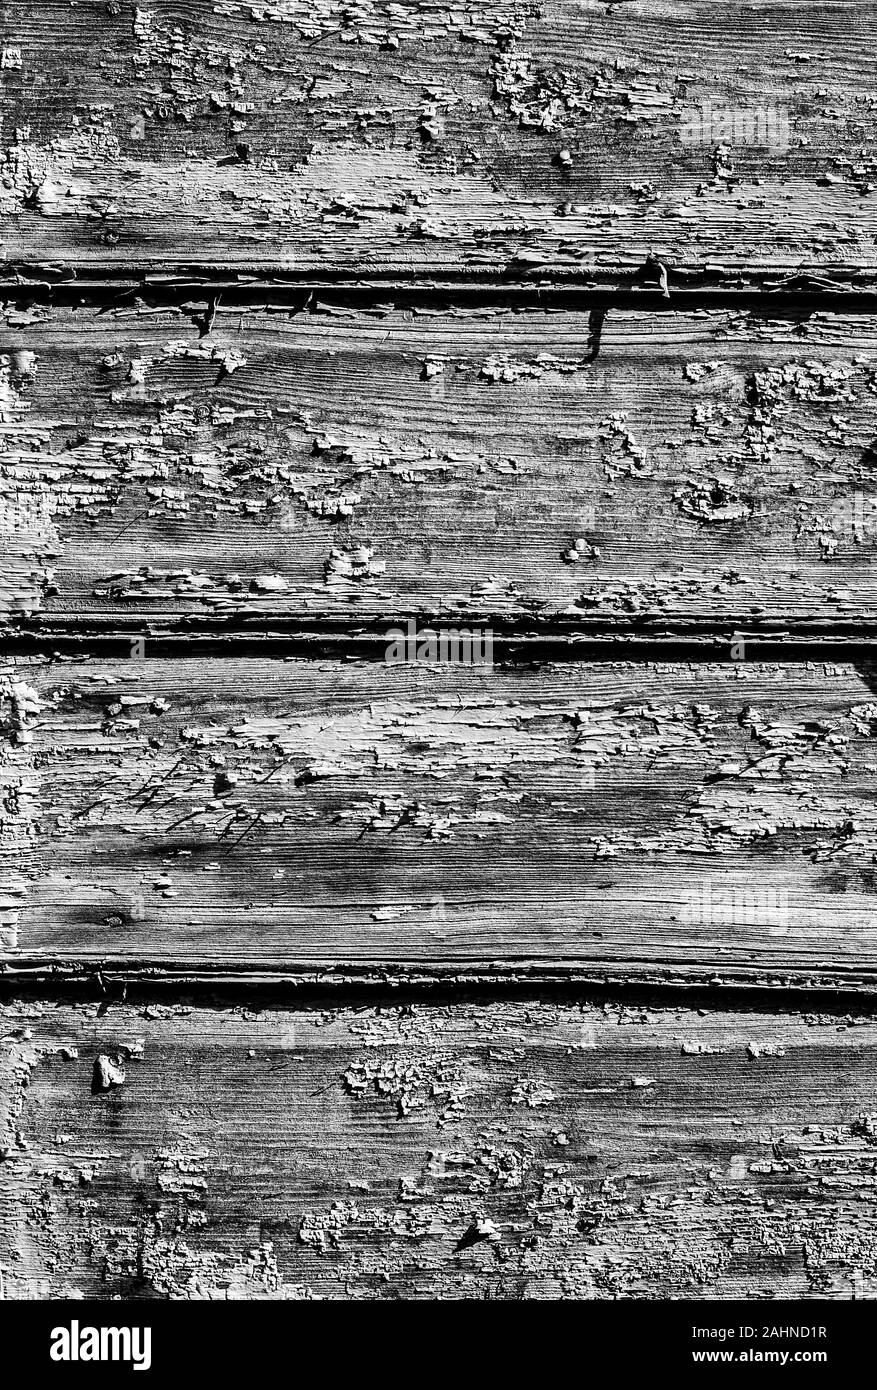 Monochrome image of rustic background made of wall of old wooden house with fall off paint Stock Photo